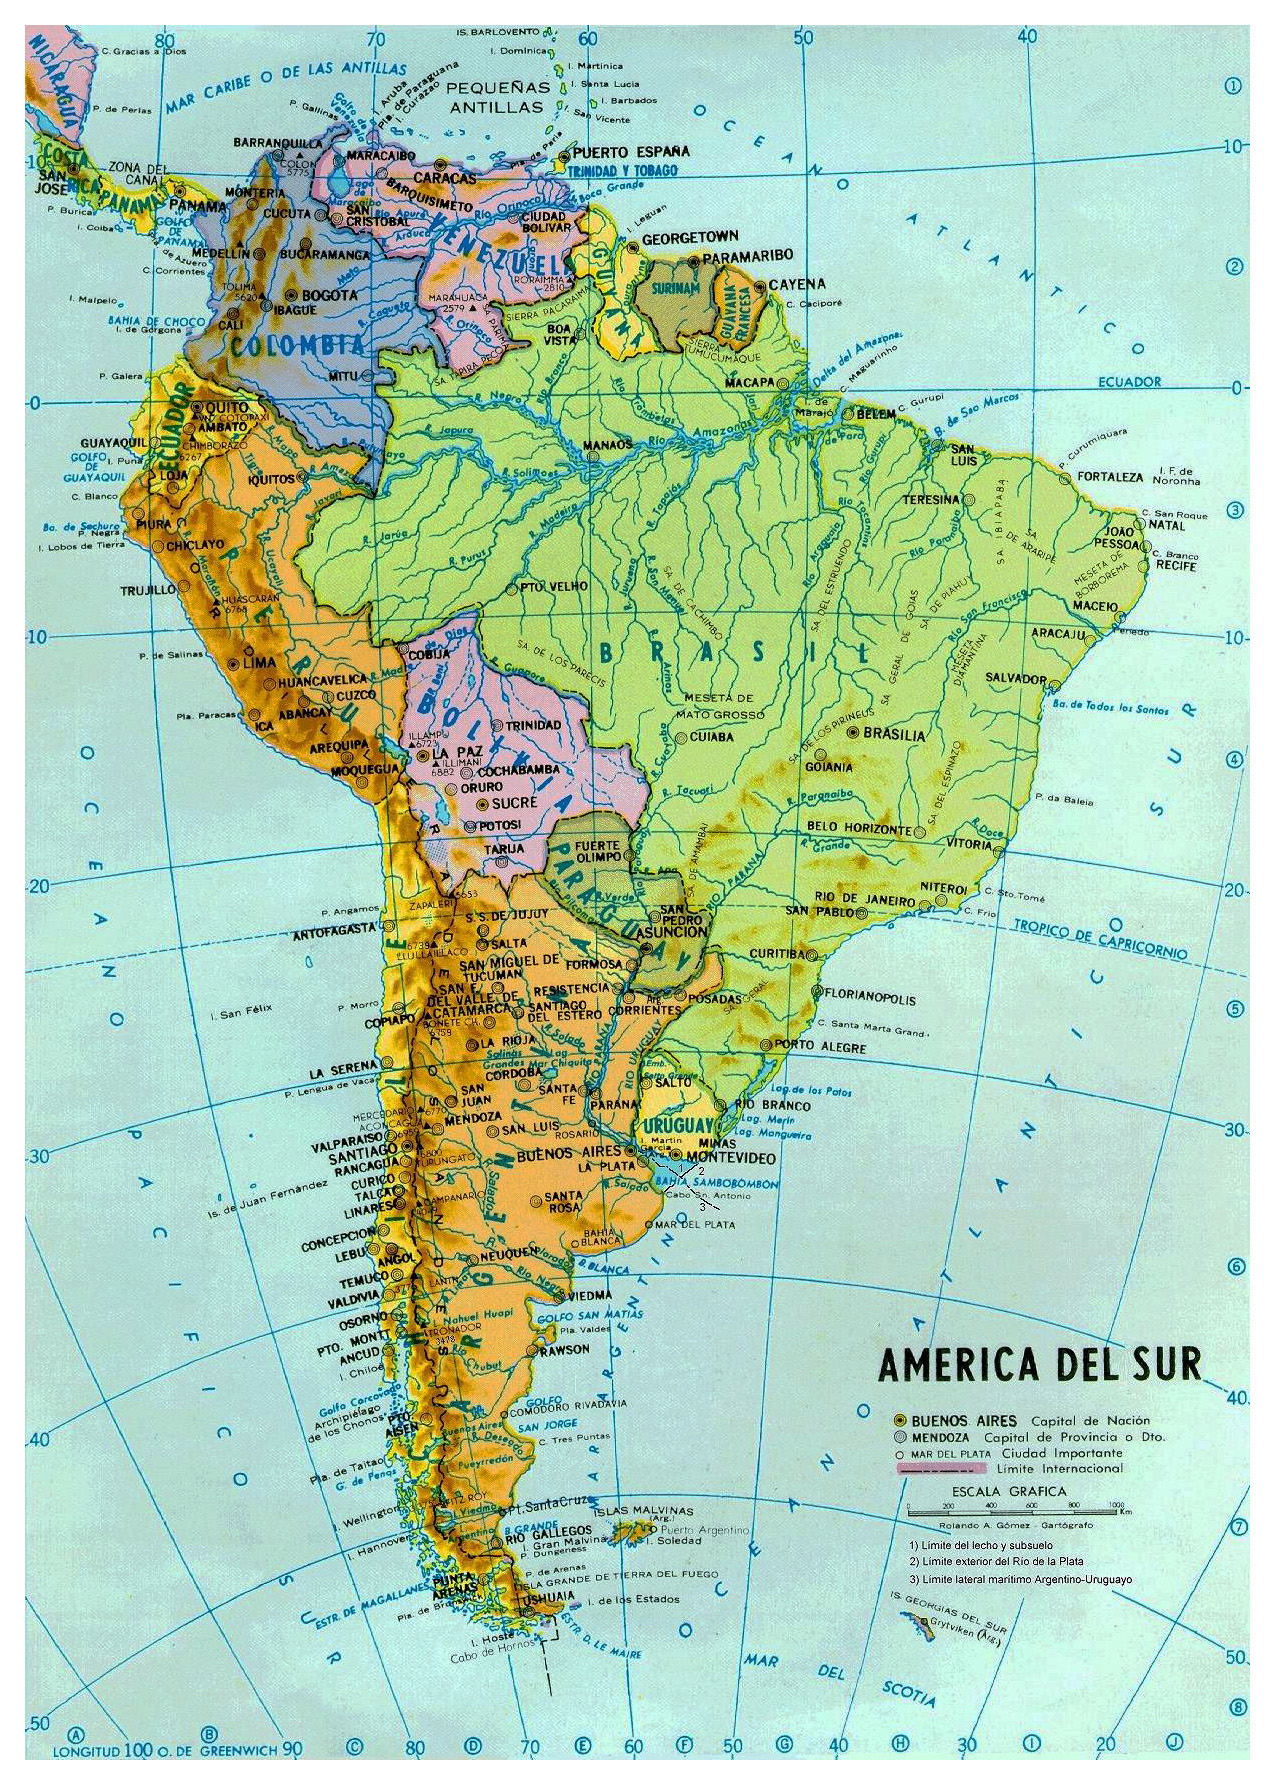 South America Map - Countries and Cities - GIS Geography